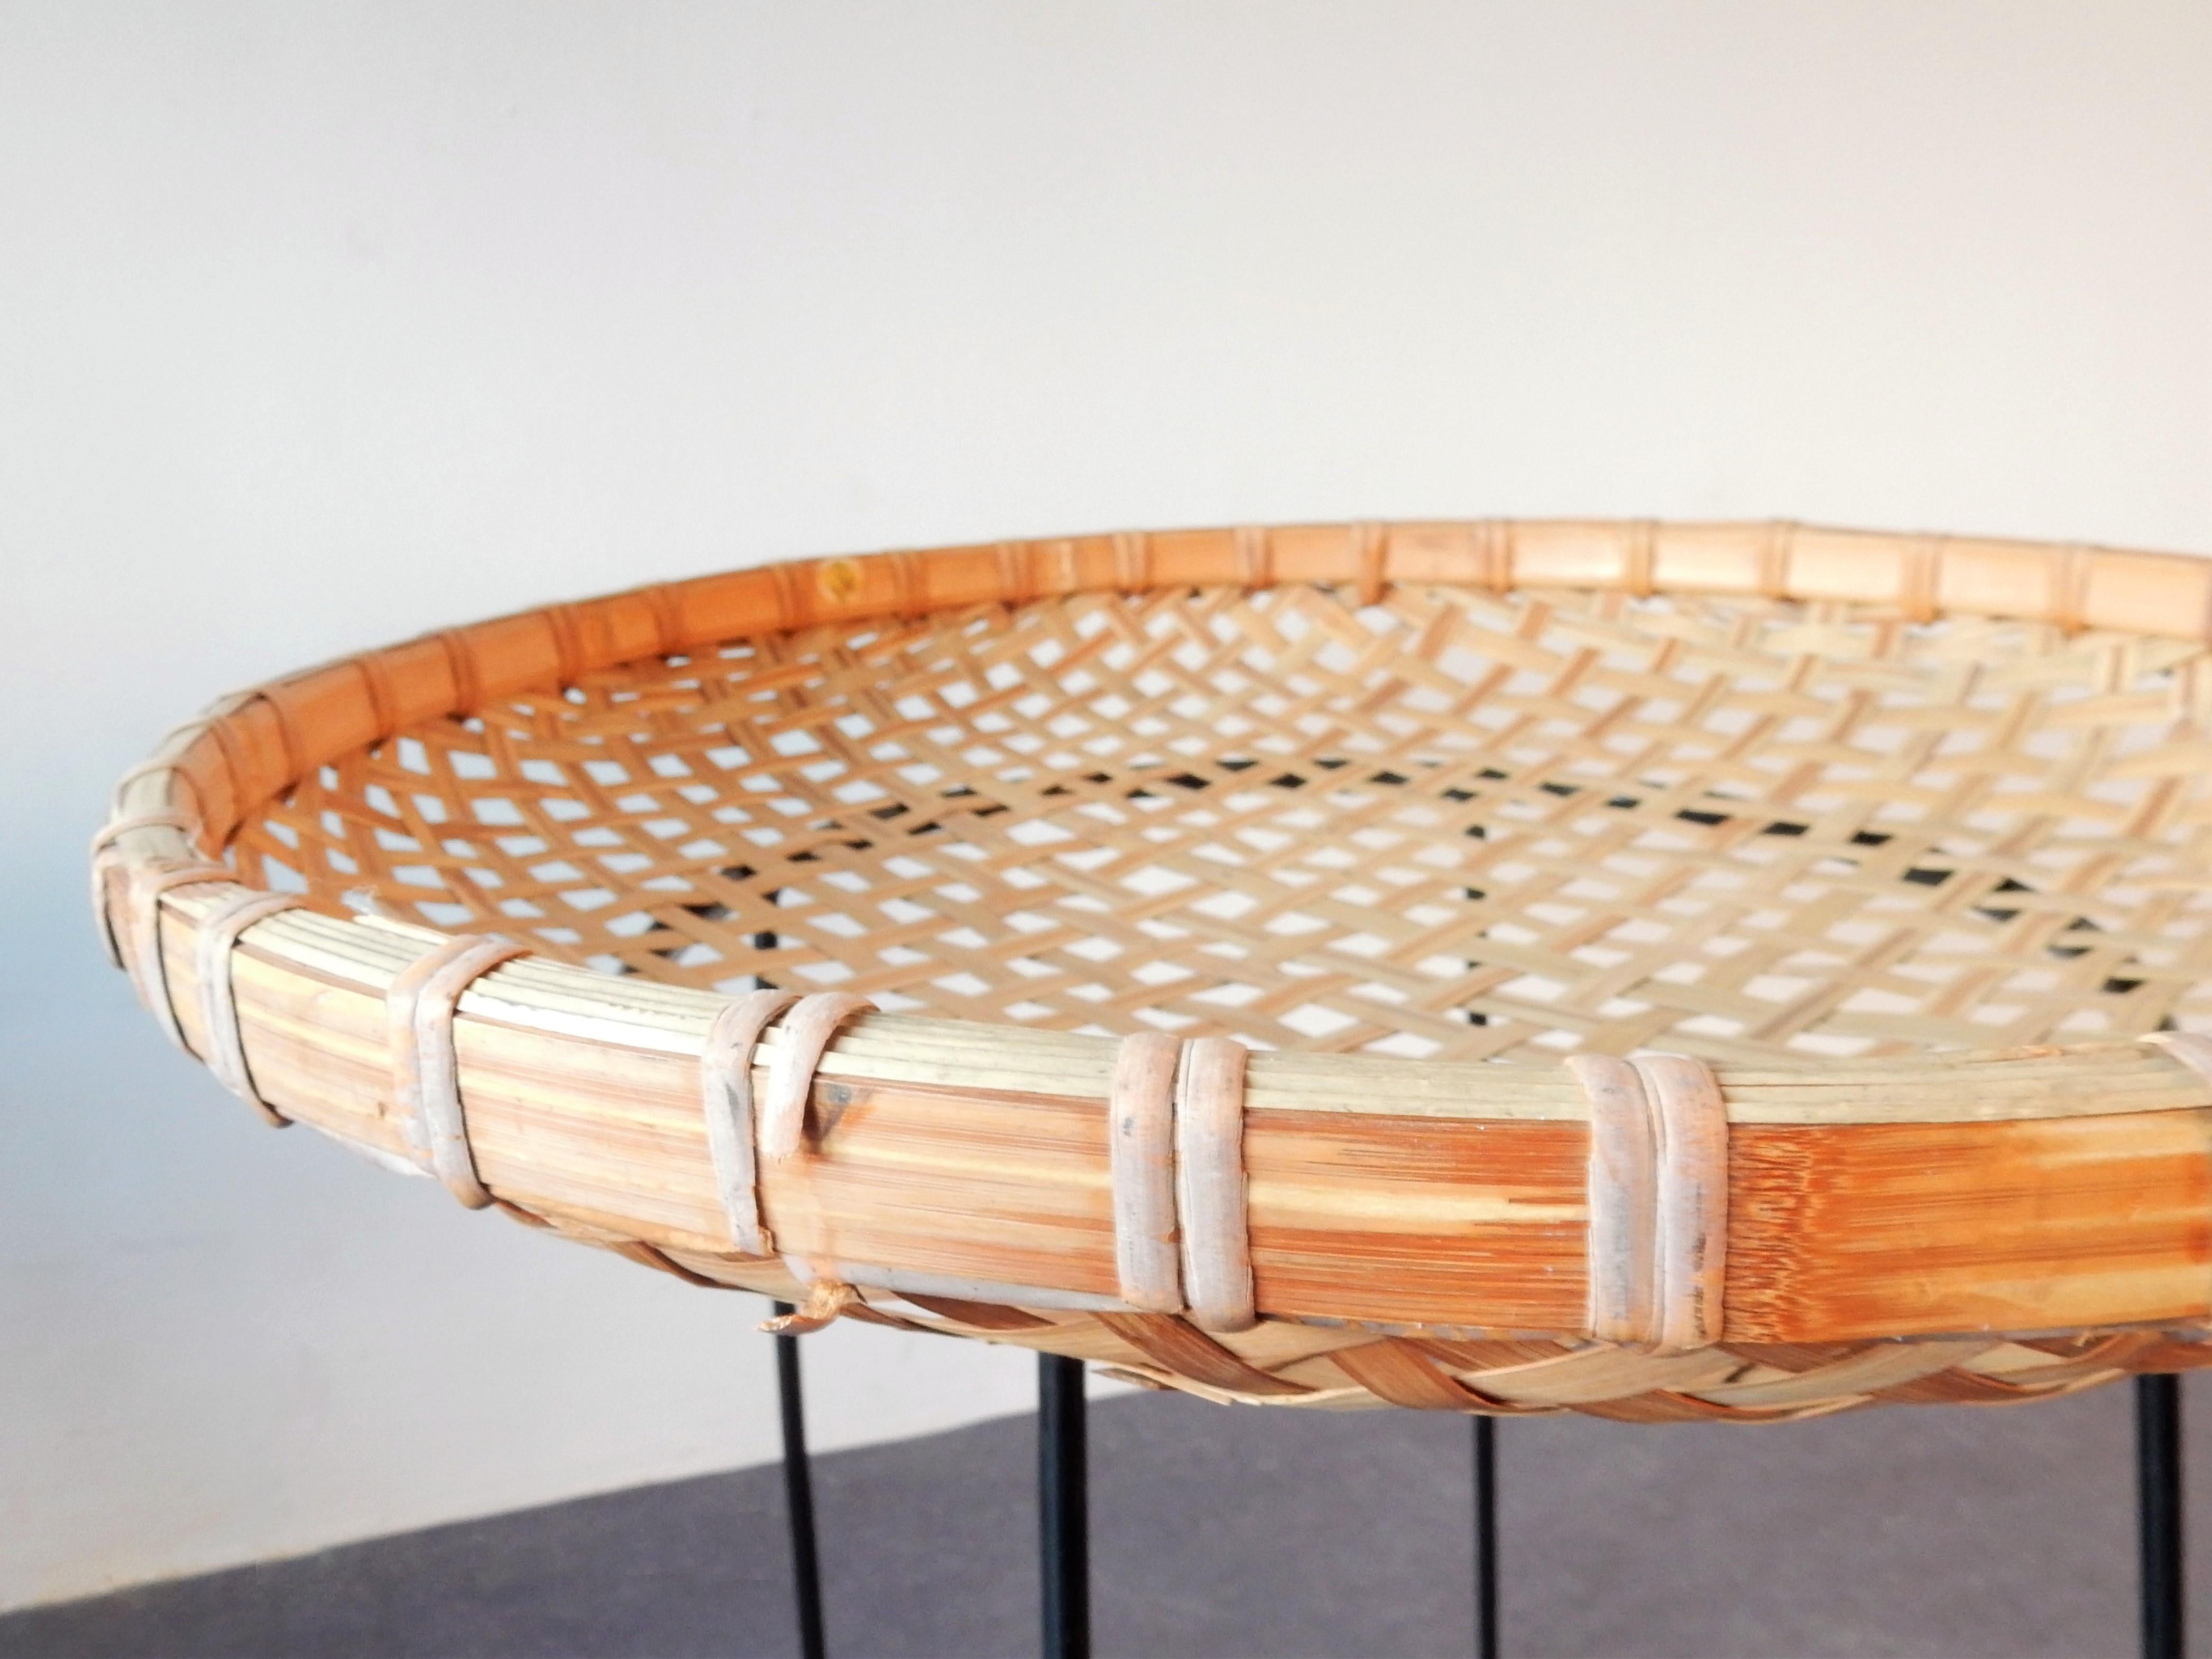 Rattan Bamboo Magazine Basket Stand by Artimeta, the Netherlands 1960s In Good Condition For Sale In Steenwijk, NL